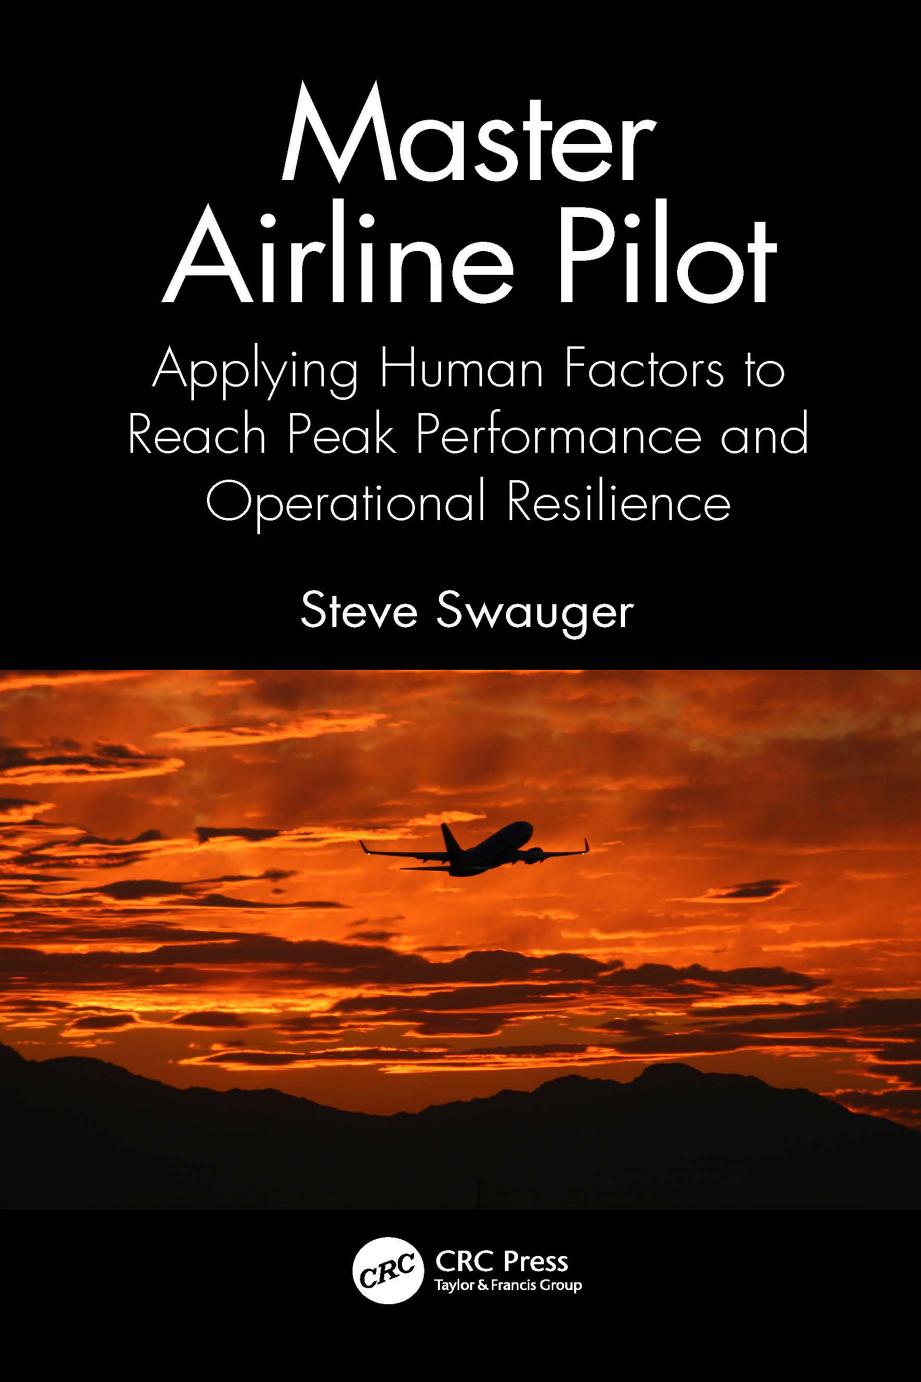 Master Airline Pilot; Applying Human Factors to Reach Peak Performance and Operational Resilience by Steve Swauger